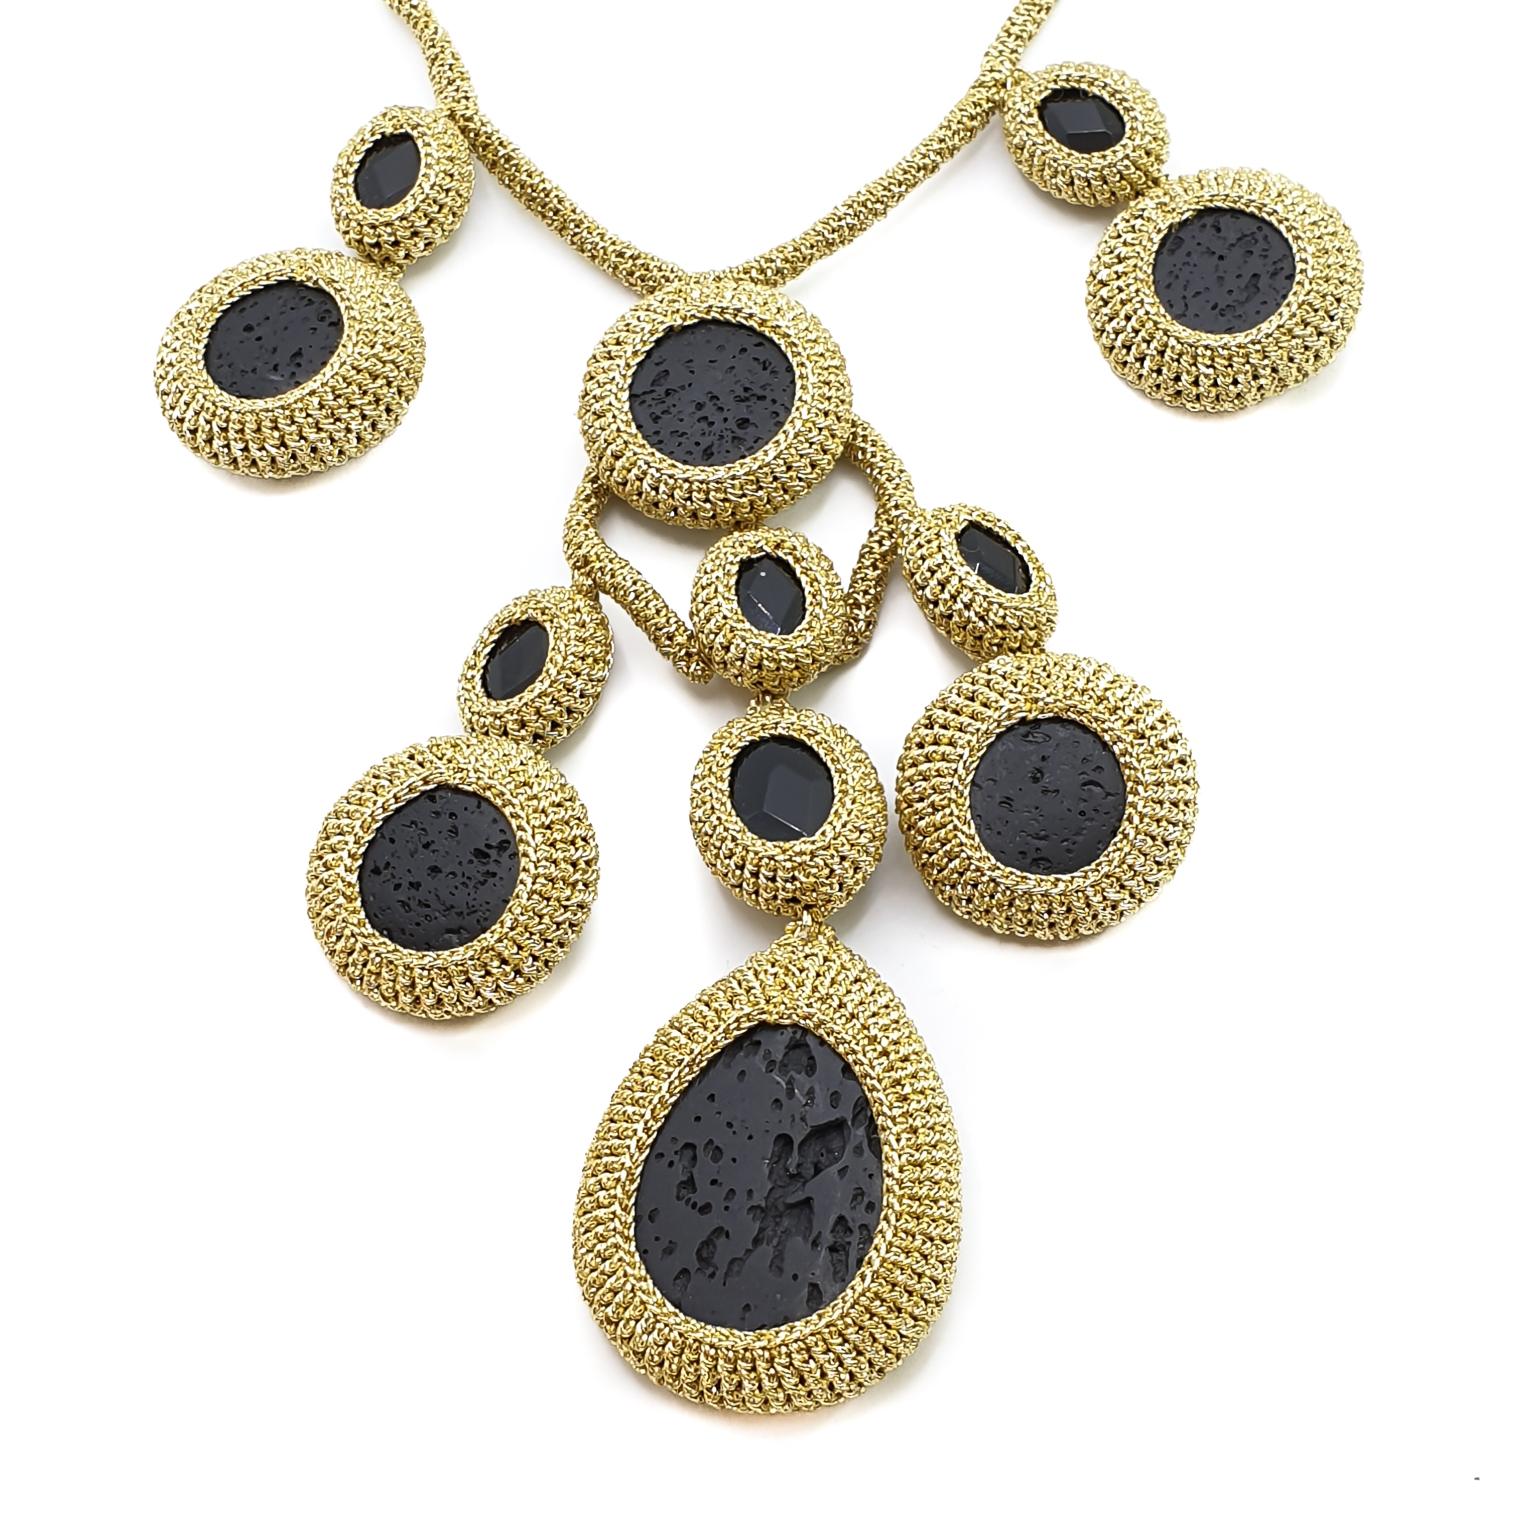 This Black Lava golden thread crochet necklace was created to honor women who have been going through dark times. The idea was to bring light to deep dark places. The golden thread is tightly crochet around the natural black Lava stones. The